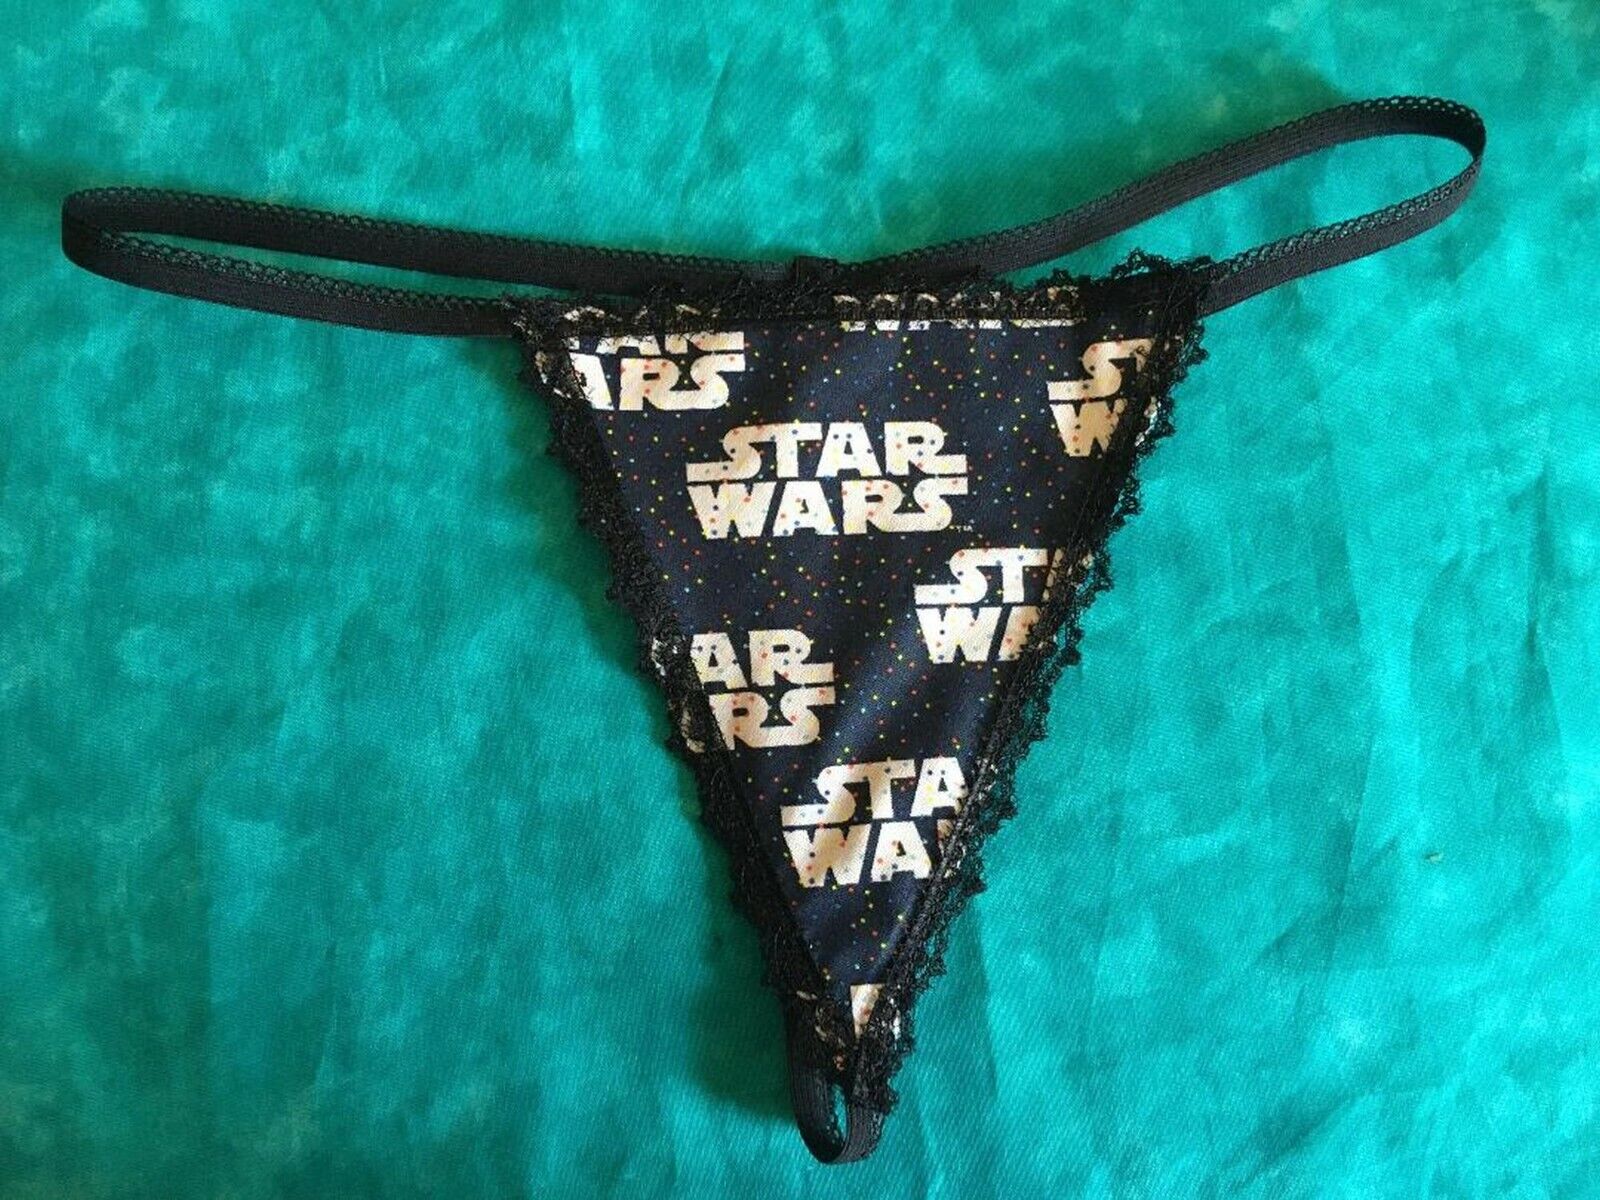 anna bragg recommends star wars lingerie pic